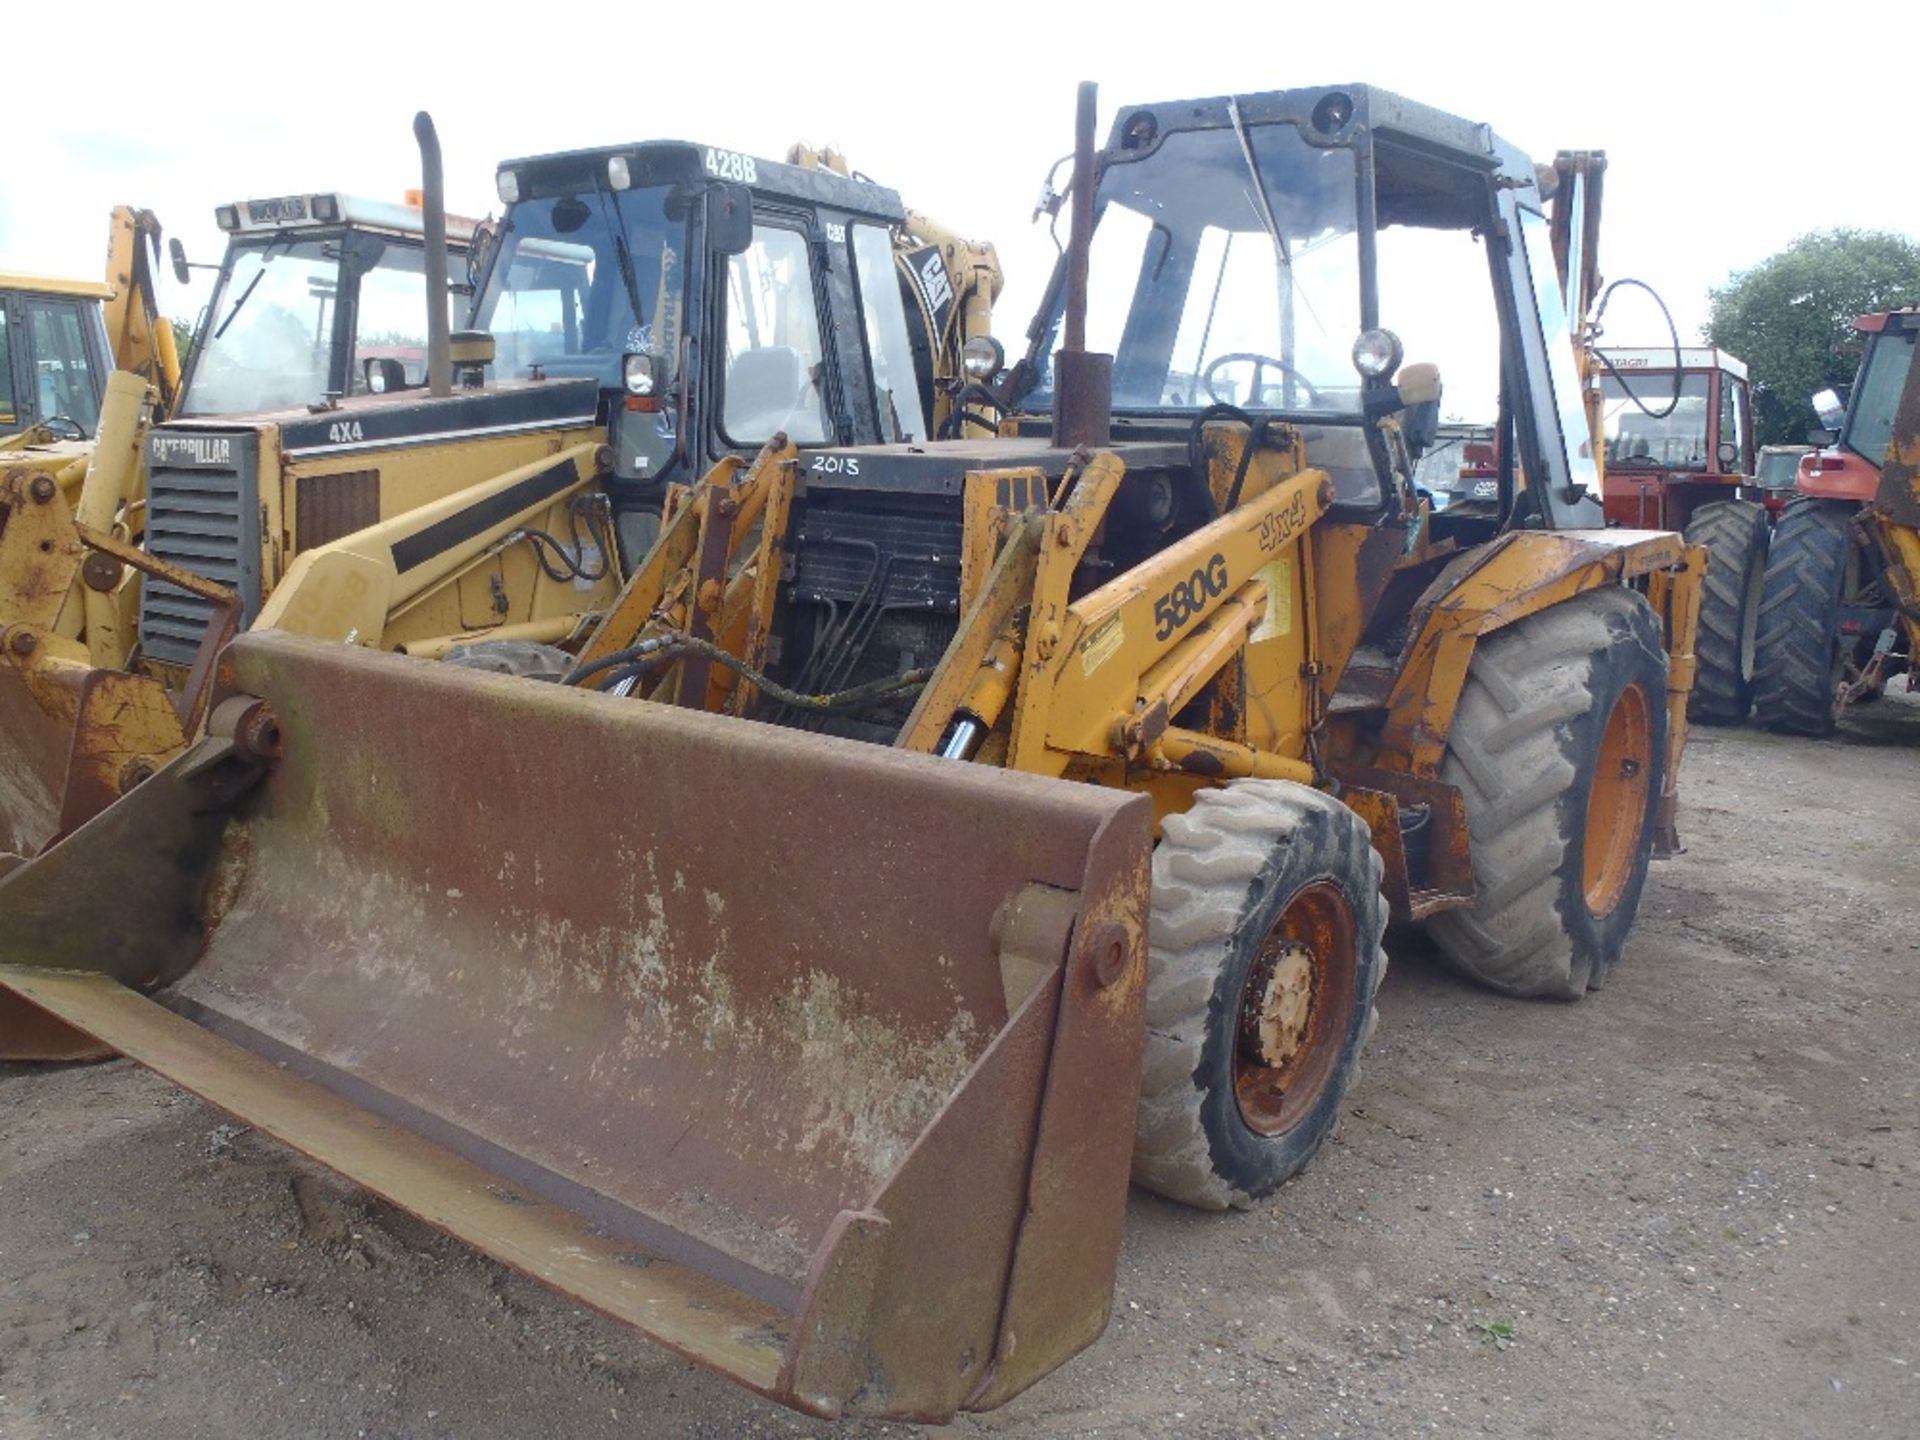 Case 580G 4wd Digger Loader with 4 in1 Bucket & Extradig